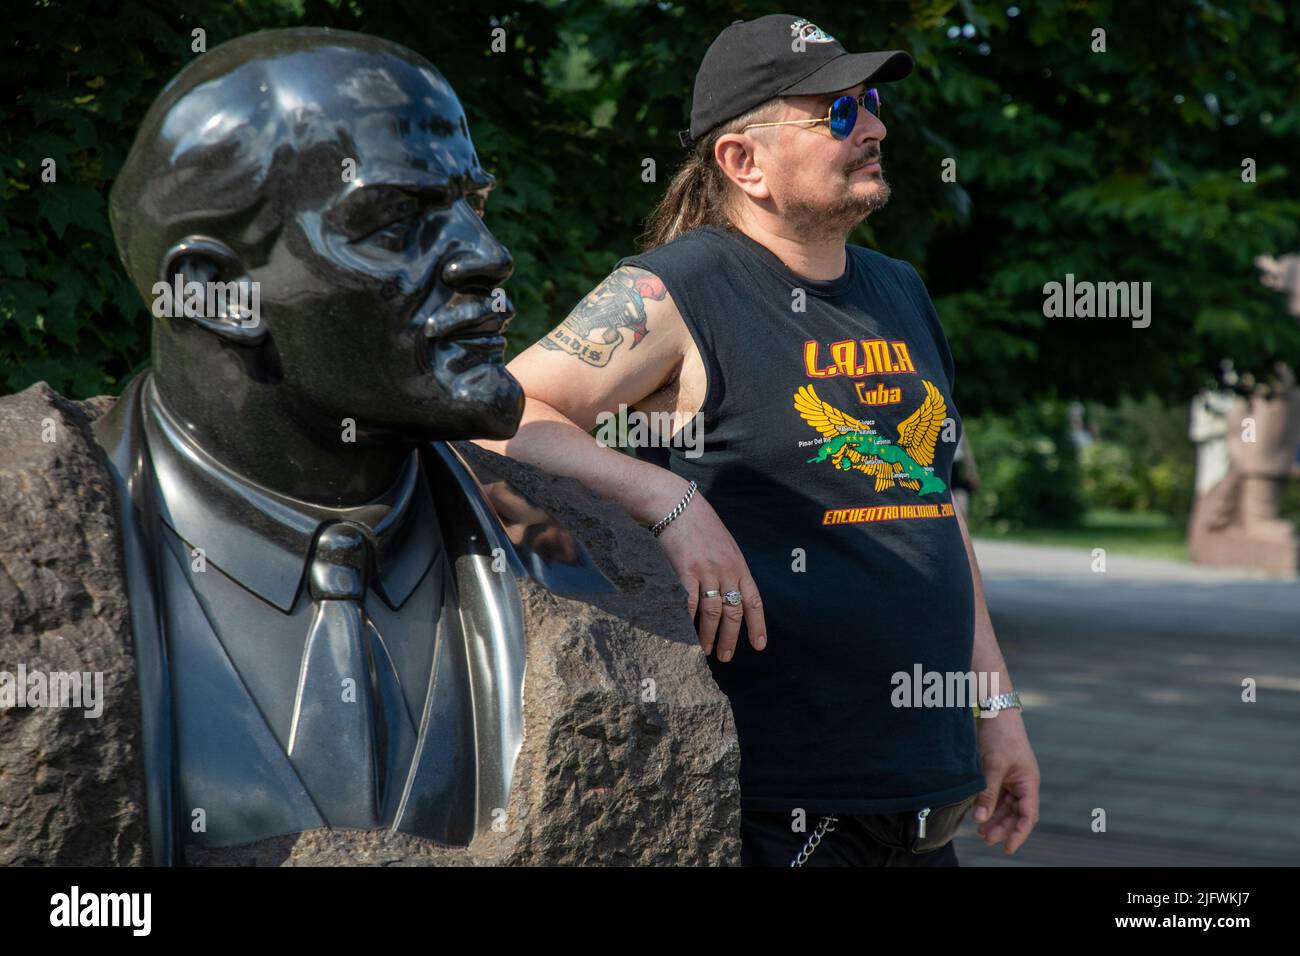 Moscow, Russia. 26th of June, 2022. A bust of Vladimir Lenin made of black stone by the sculptor Merkulov at the Fallen Monument Park of Muzeon Arts Park in Moscow, Russia Stock Photo